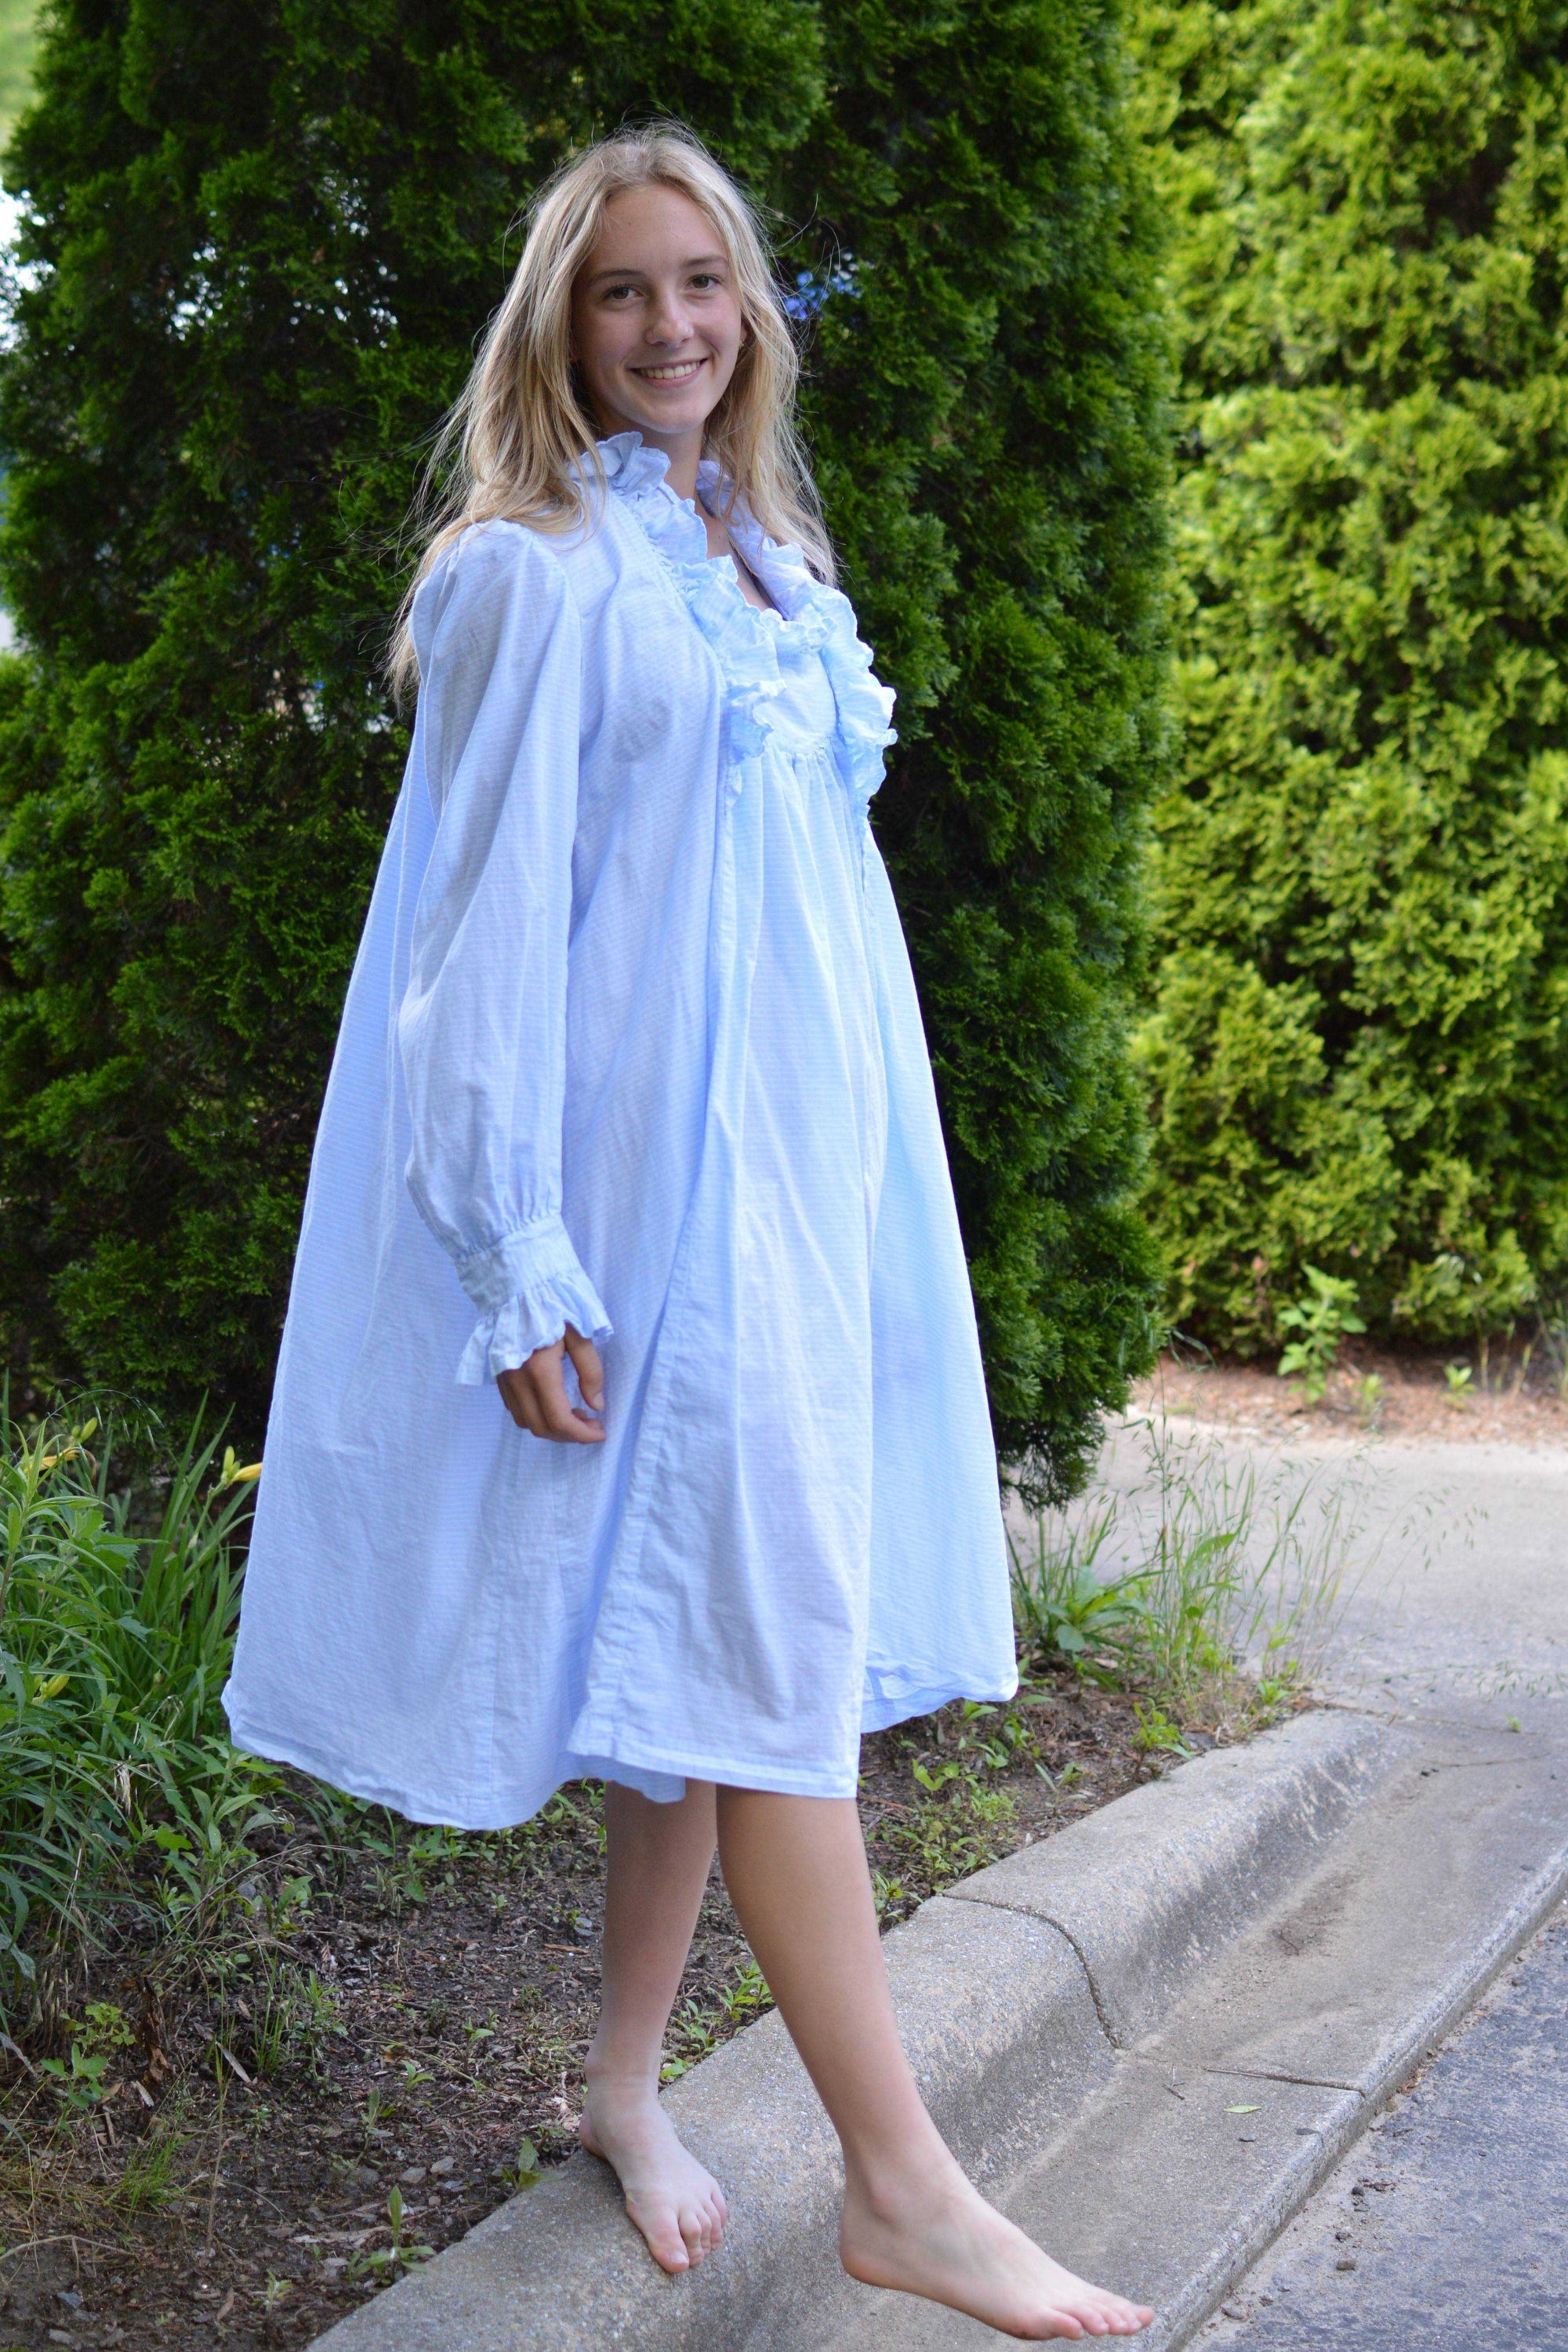 Young woman standing on a curb in a light blue ruffled nightgown.